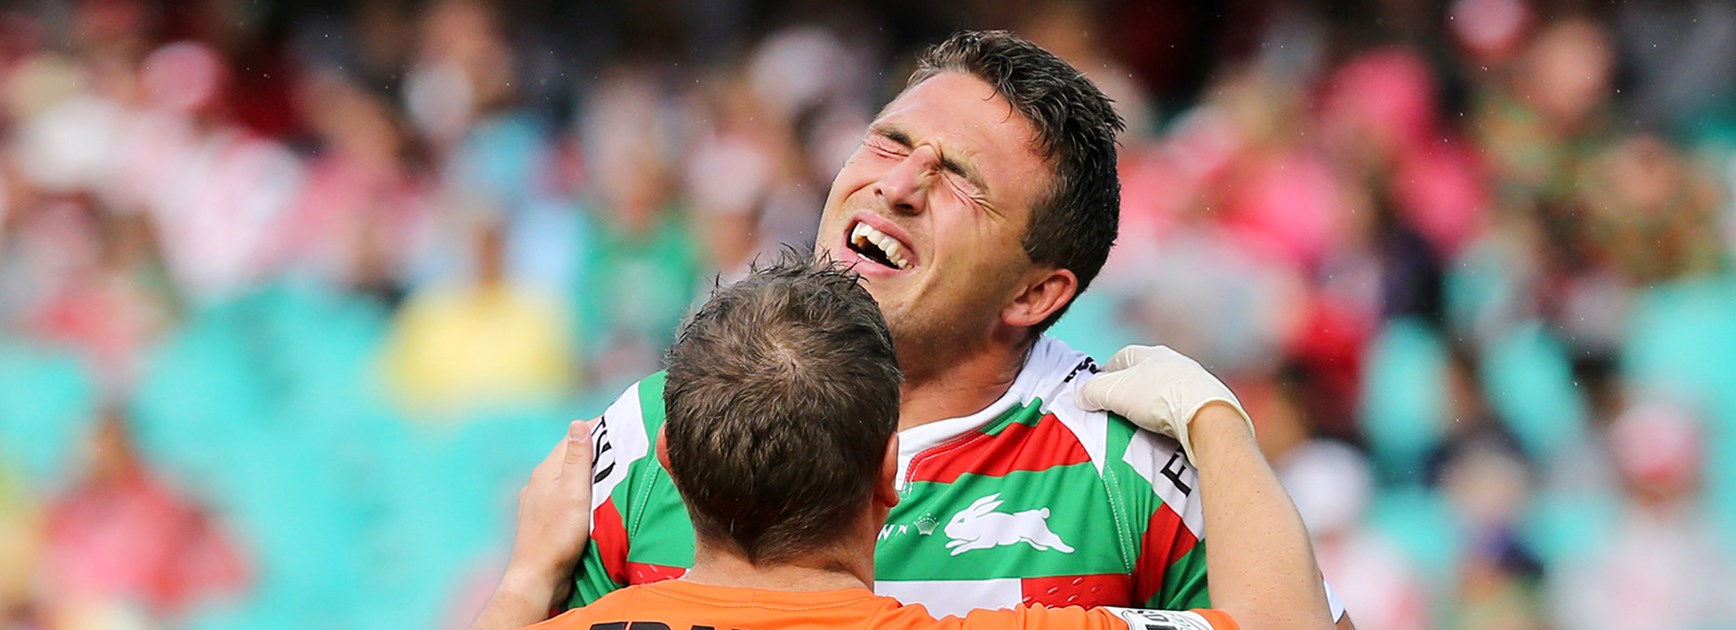 South Sydney forward Sam Burgess suffered an injury scare in the Round 3 clash with the Dragons.